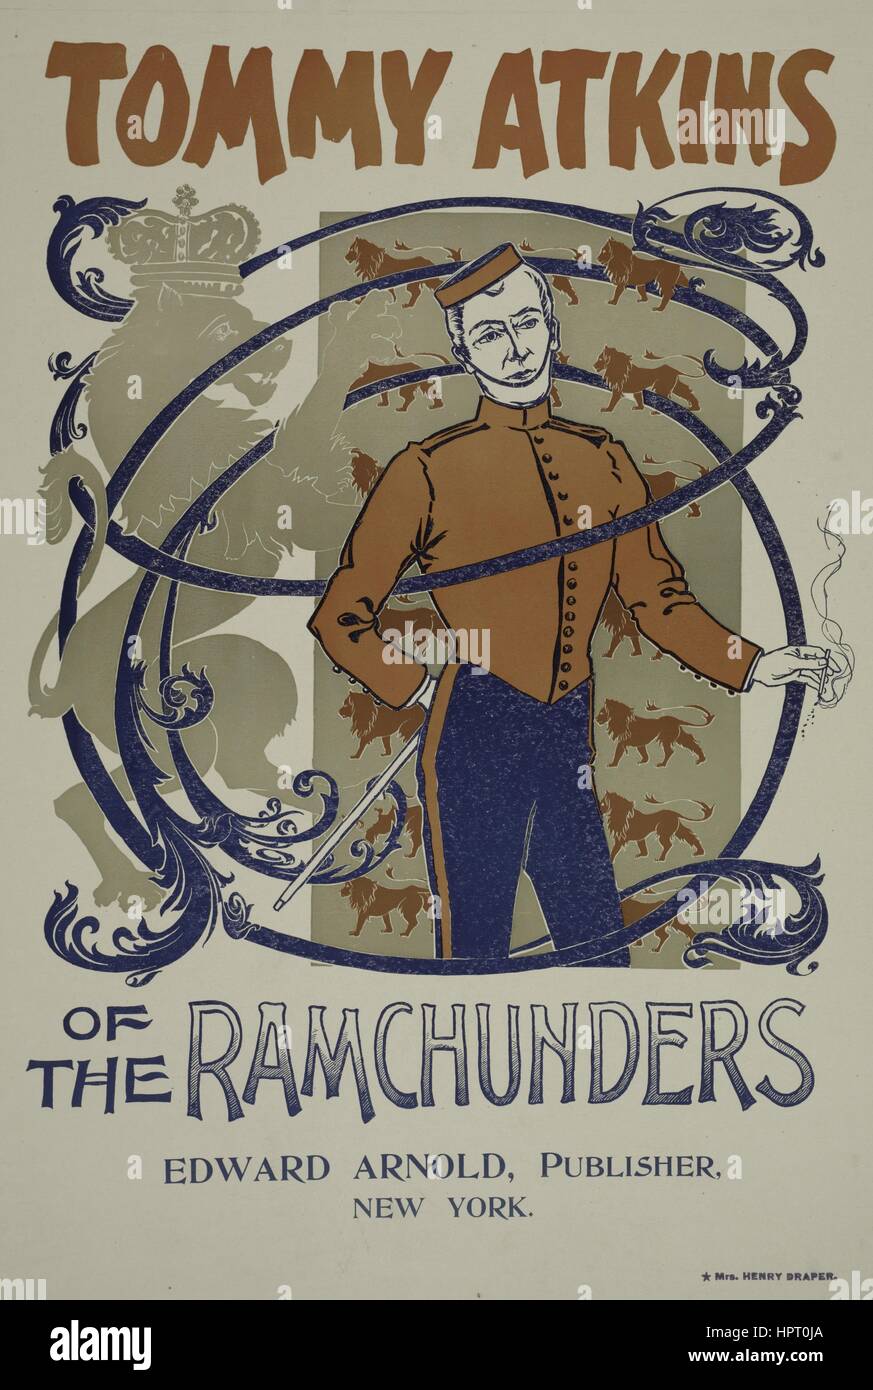 Poster advertisement for a book titled Tommy Atkins of the Ramchunders by Edward Arnold which displays a man in some kind of uniform, 1903. From the New York Public Library. Stock Photo